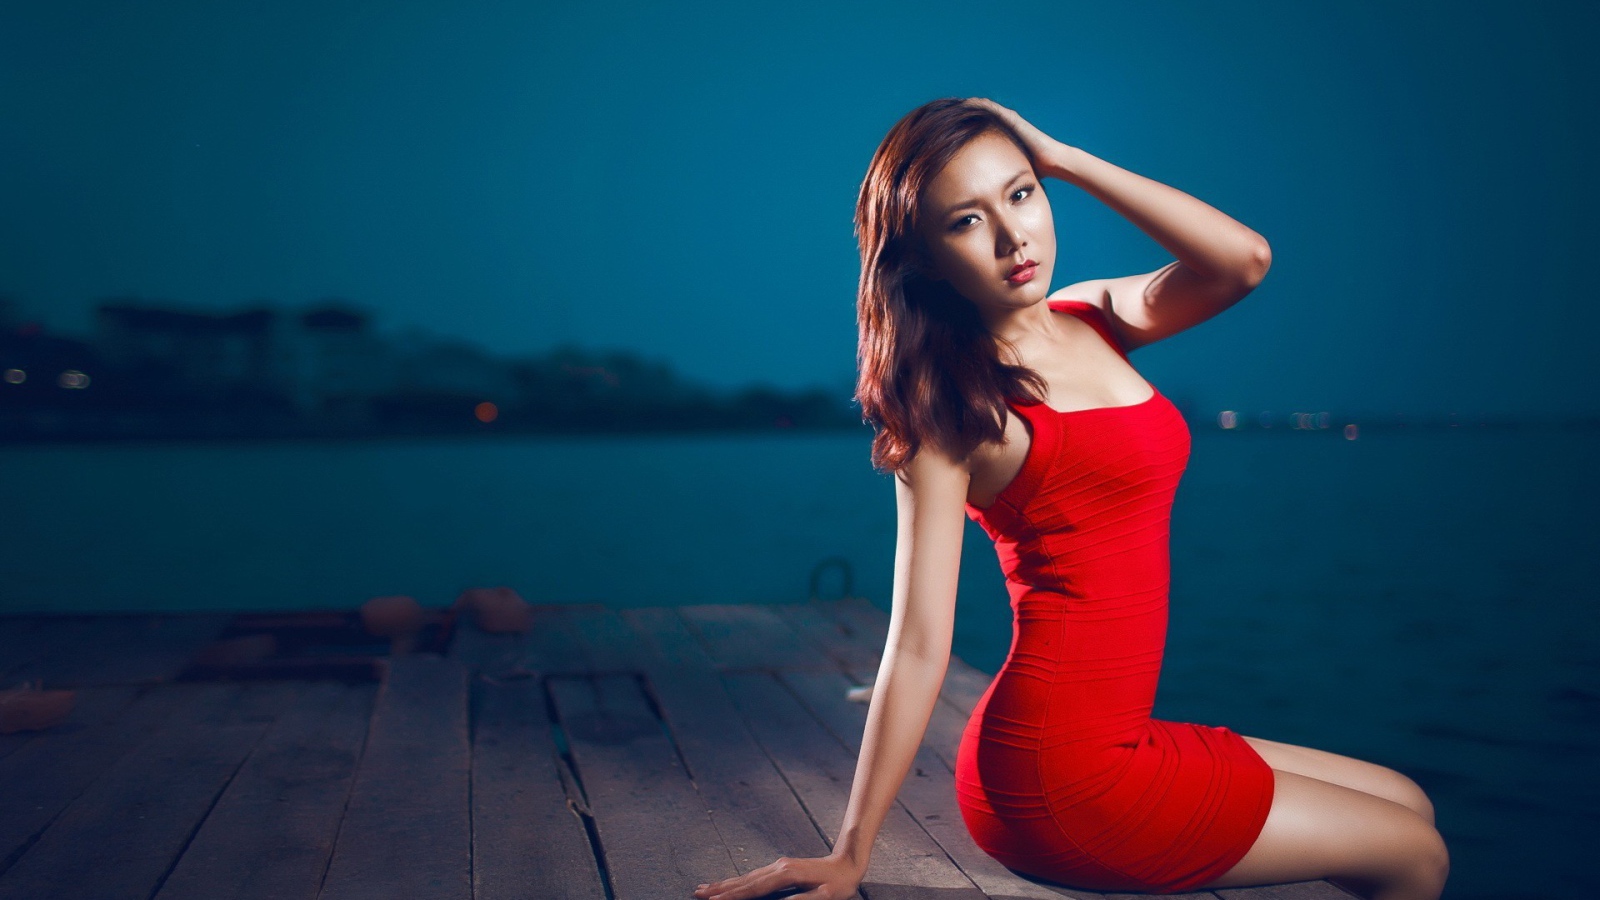 The girl in the red dress sitting on the edge of a wooden jetty